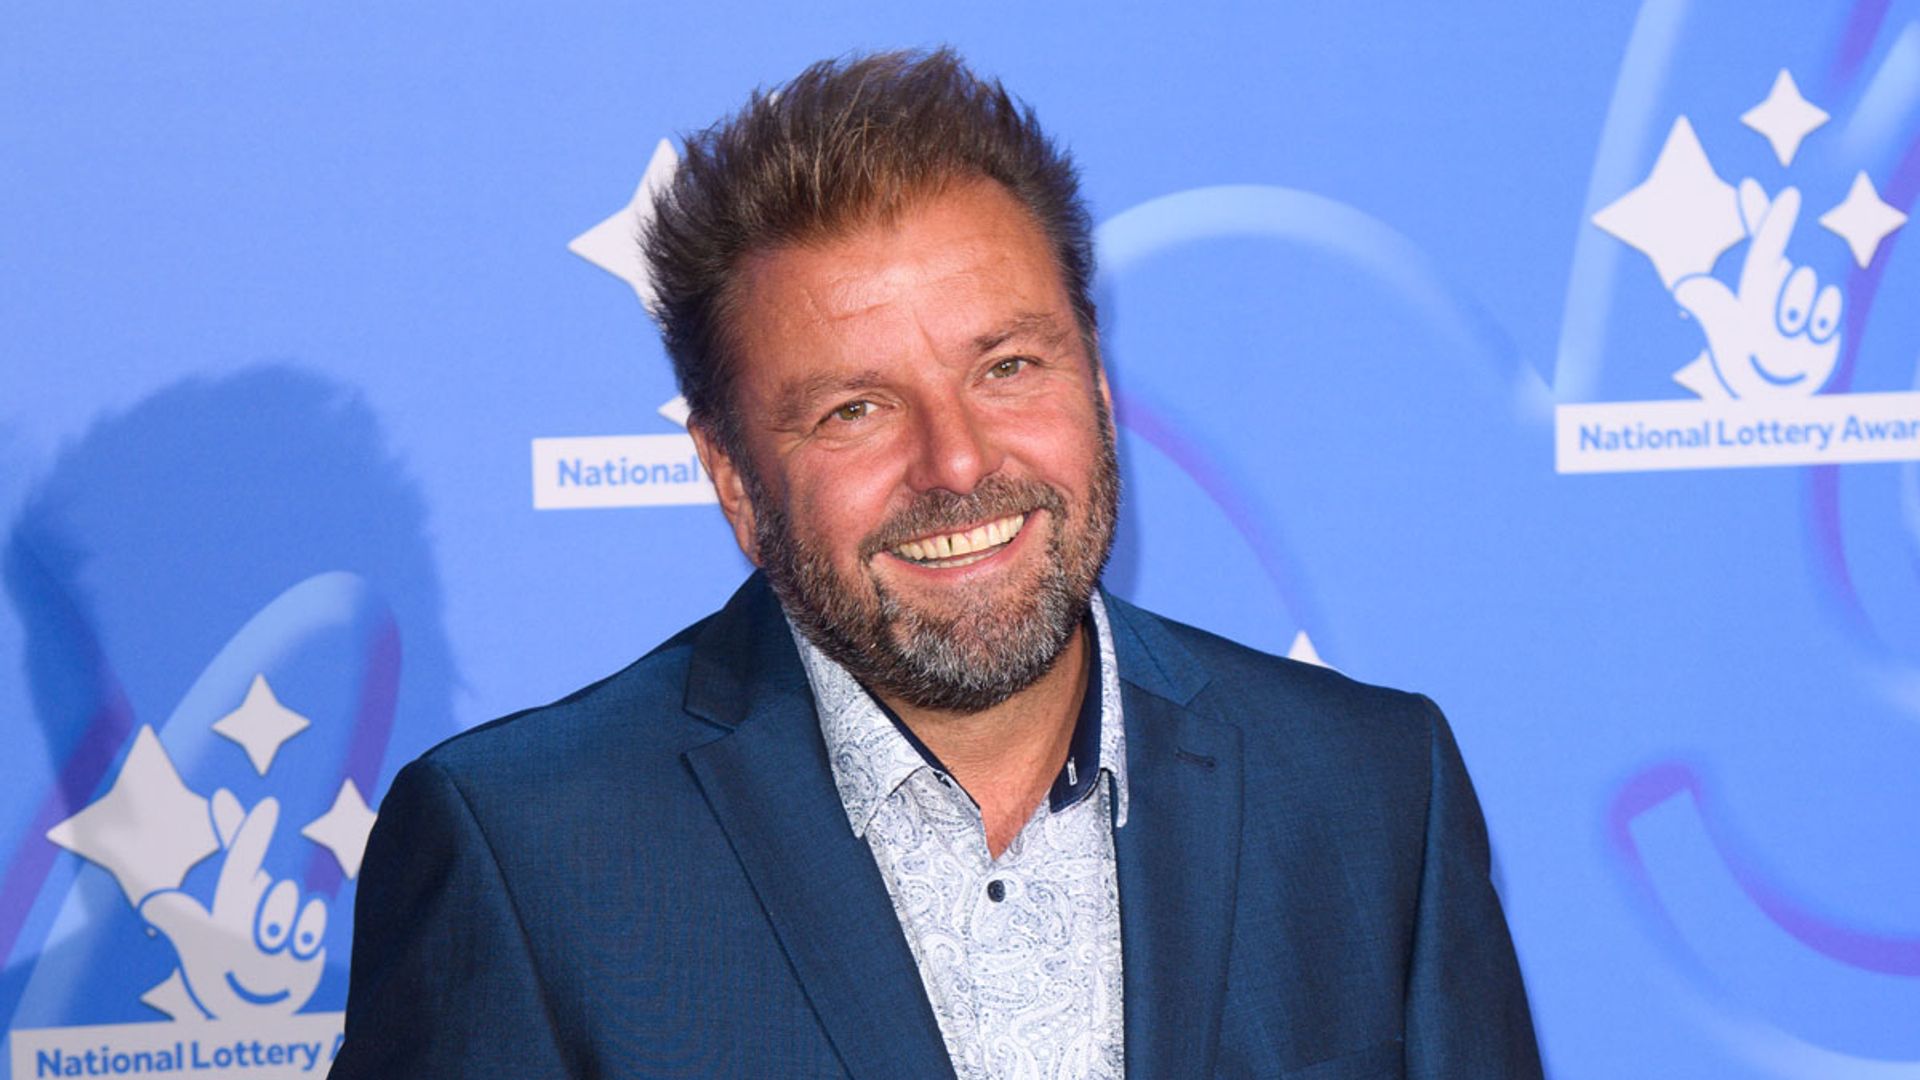 Homes Under The Hammer's Martin Roberts shares health update amid life-saving surgery